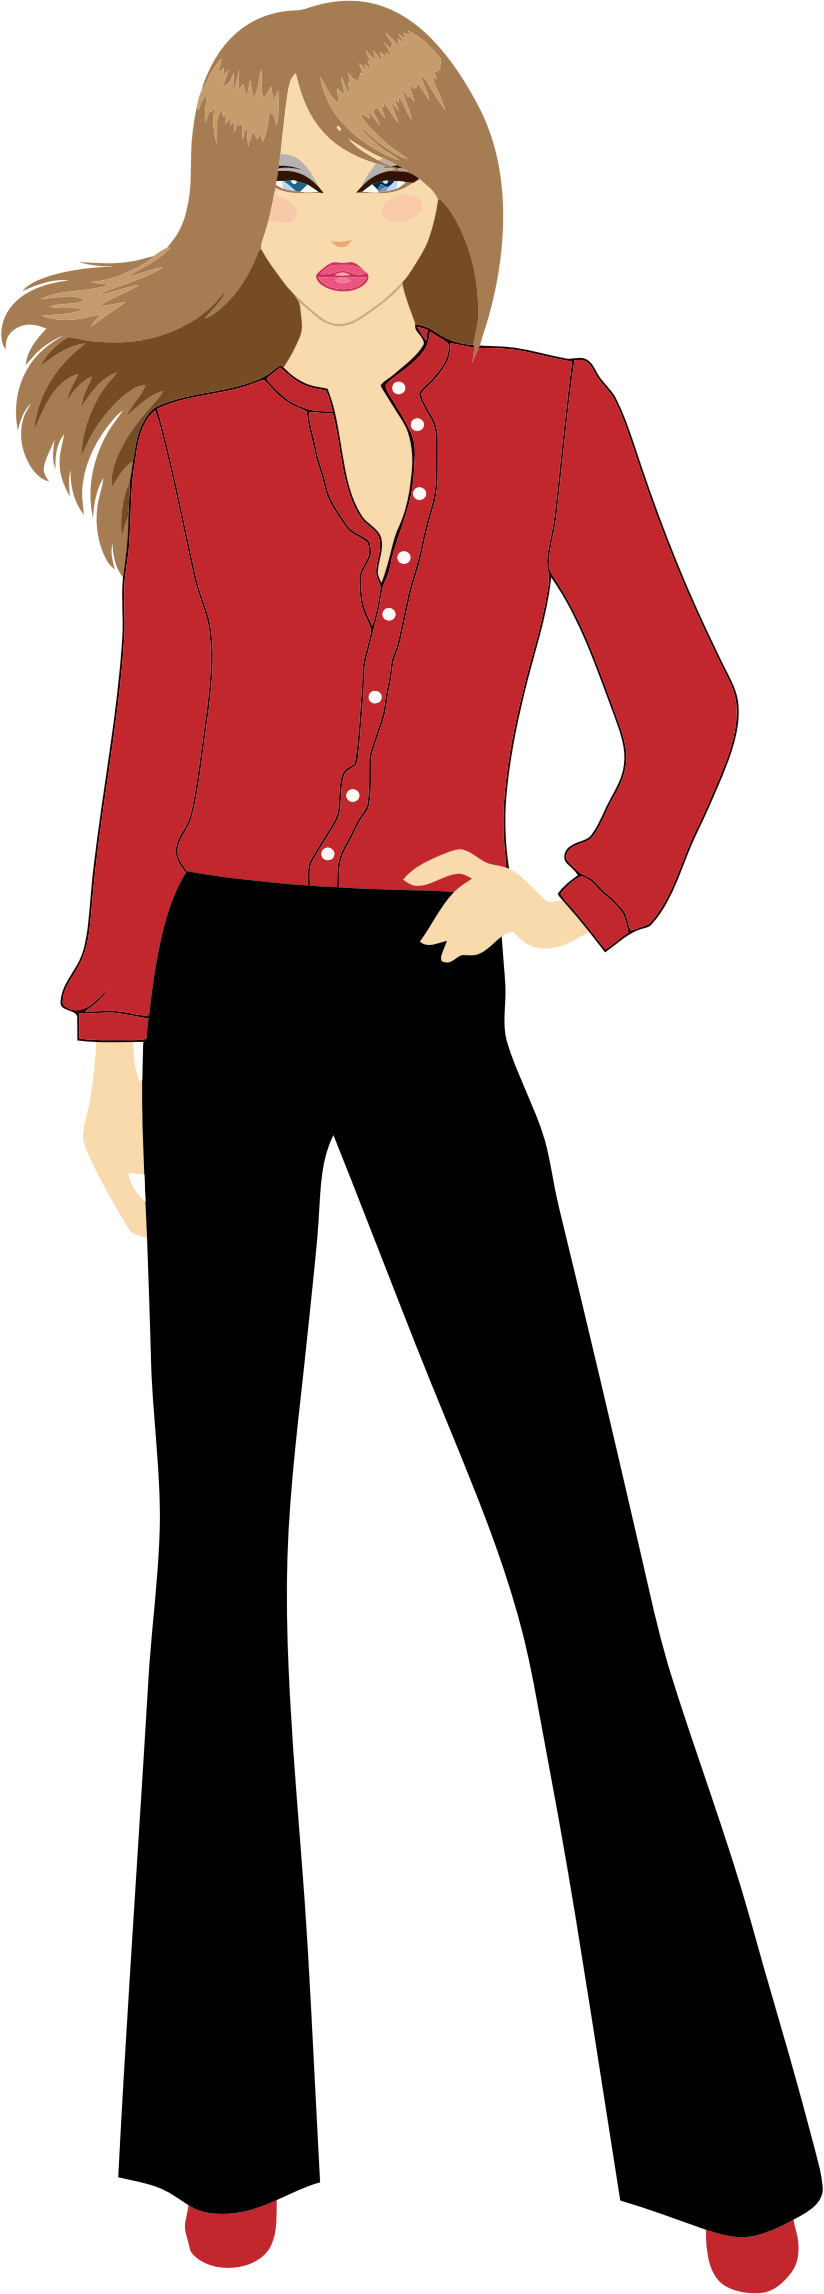 Woman with hand on. Fashion clipart lady suit